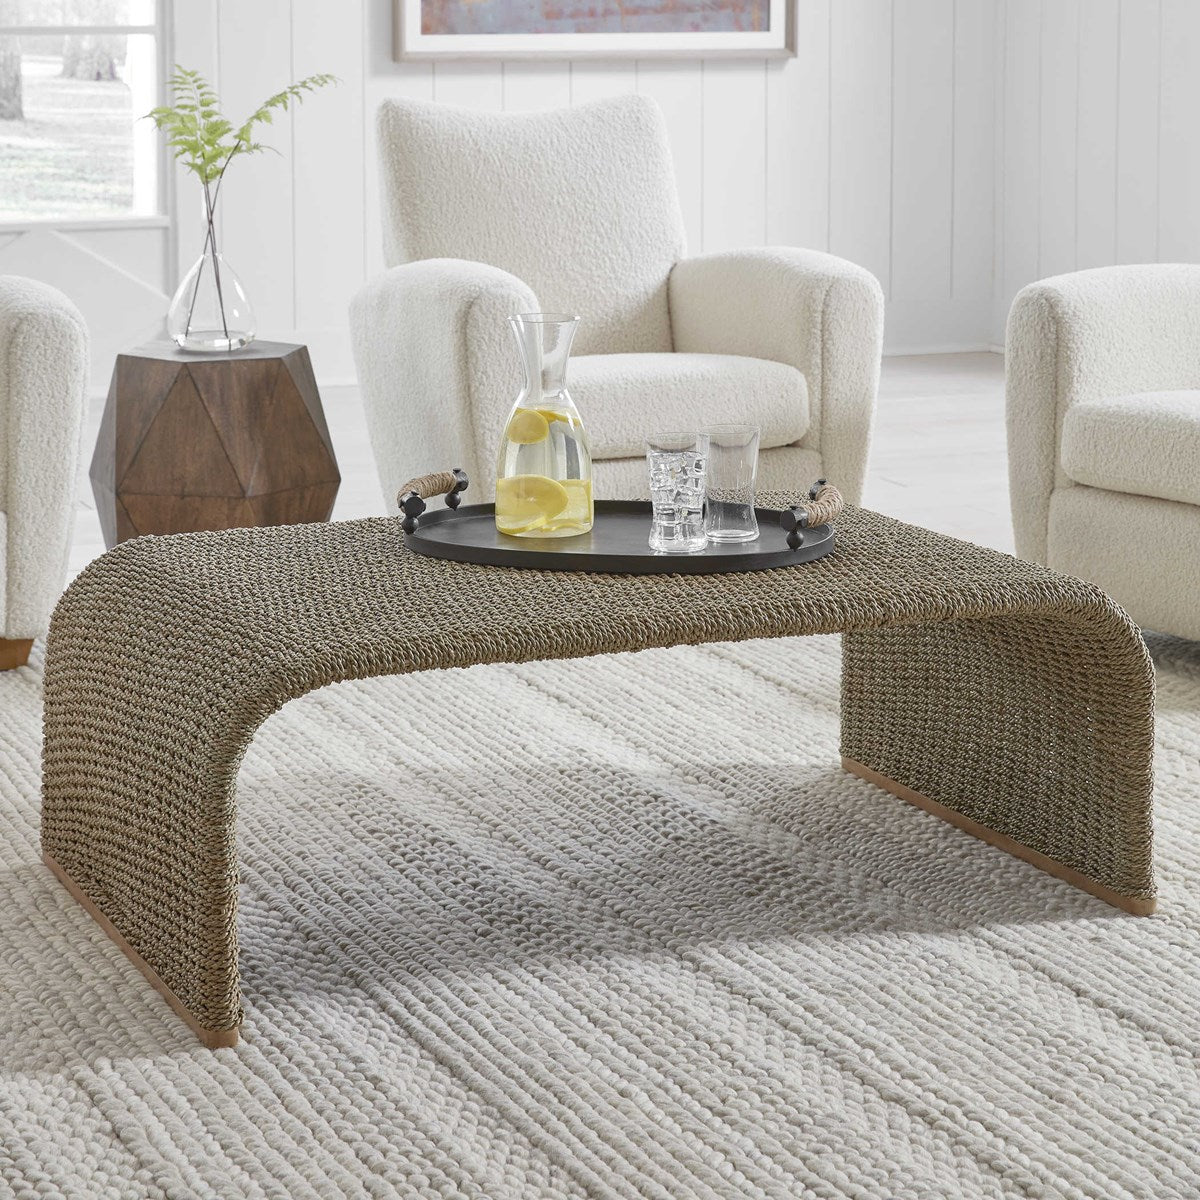 Calabria Coffee Table